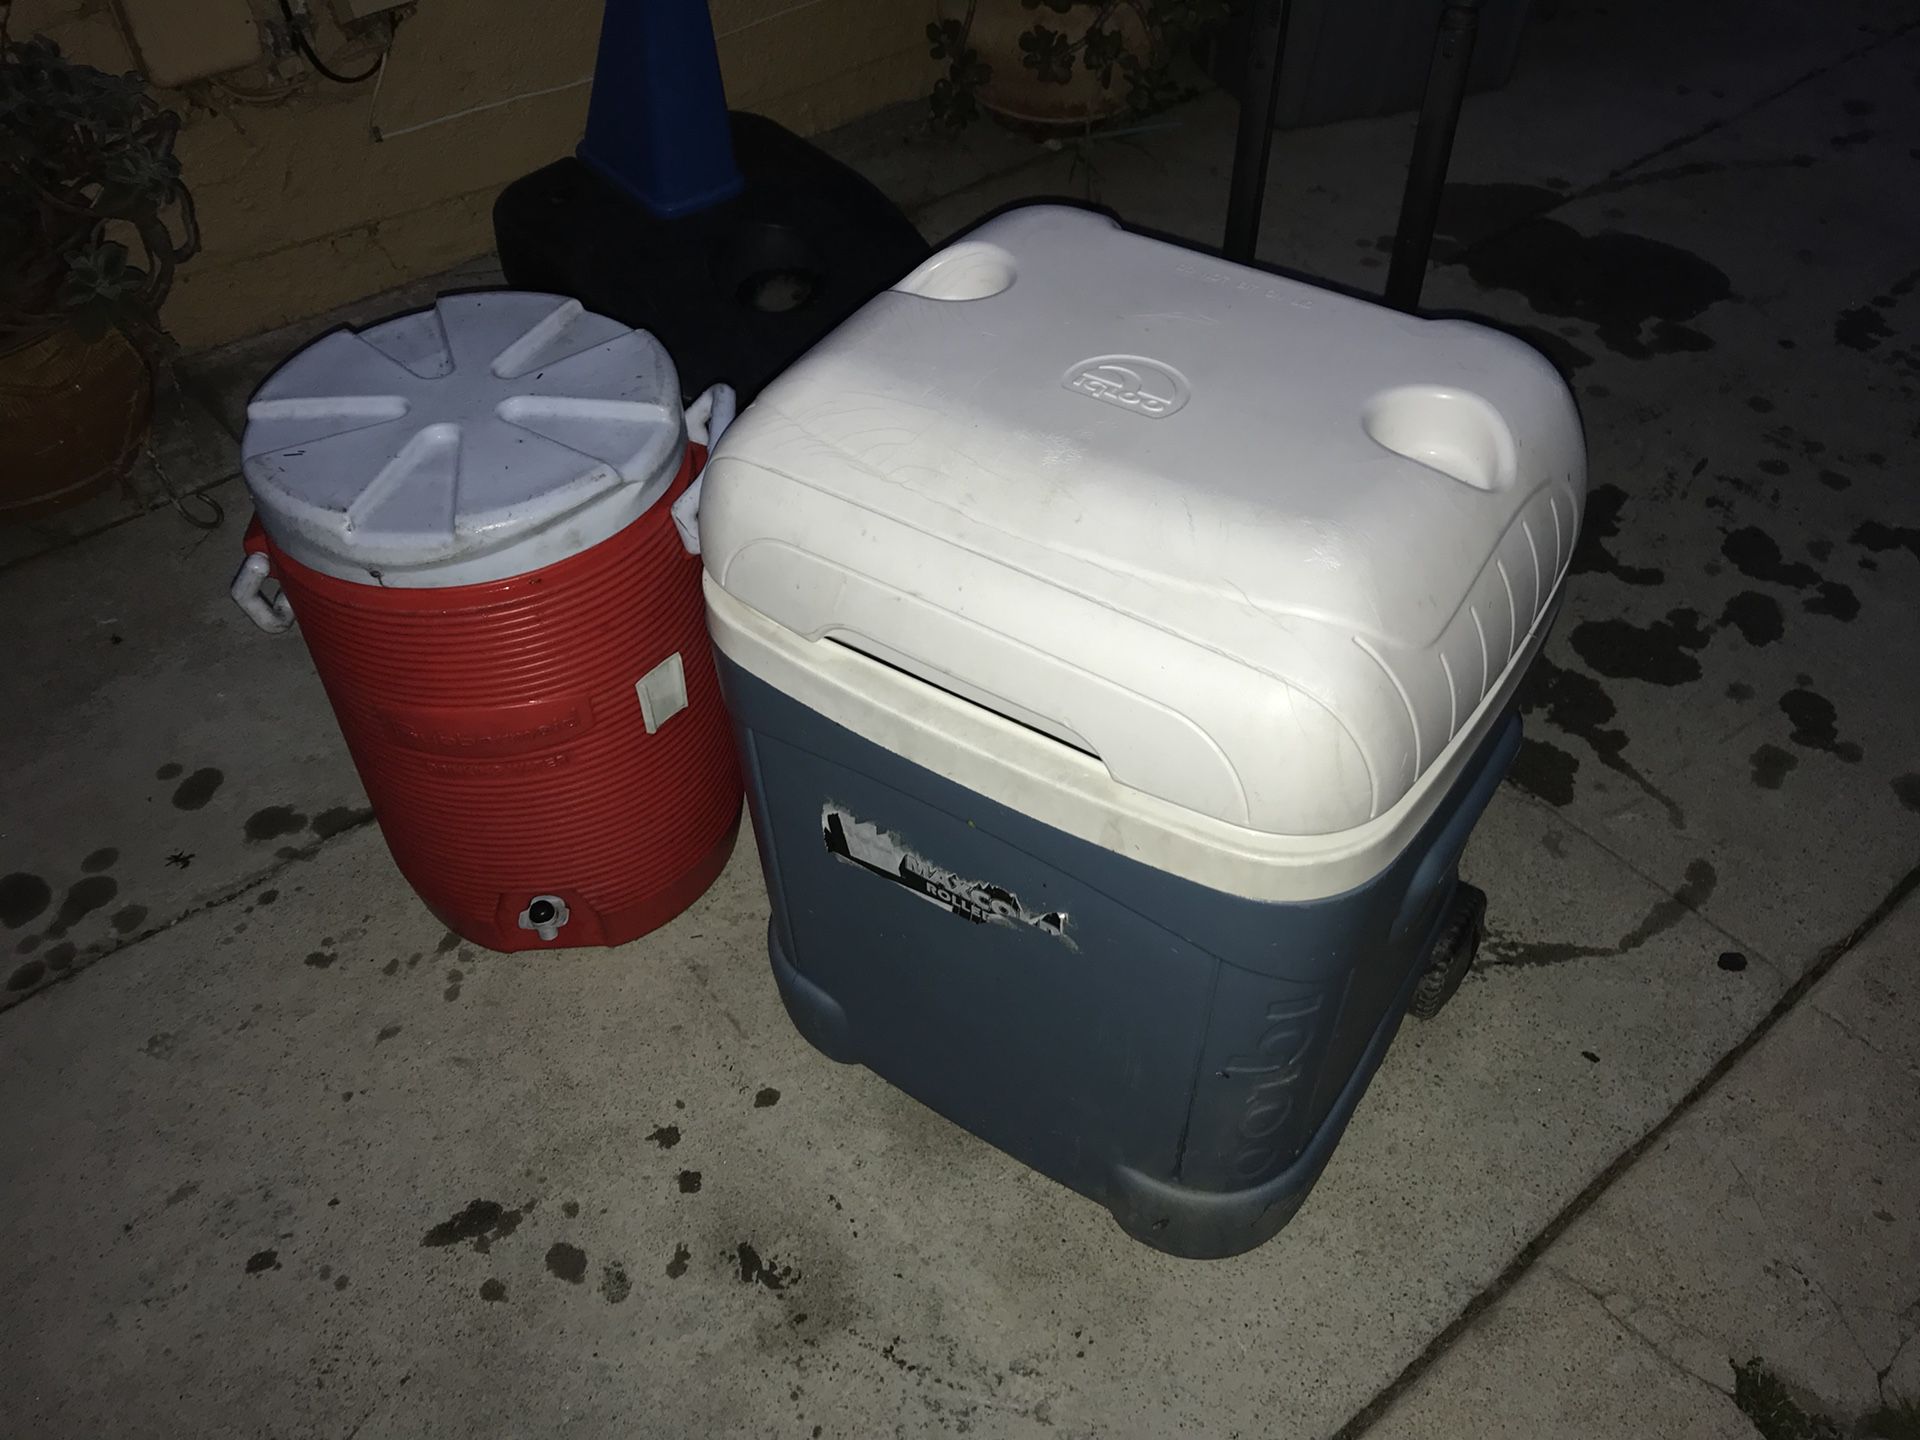 Ice cooler 15-$20 FIRM PRICE NO DELIVERY CASH OR TRADE FOR BABY FORMULA